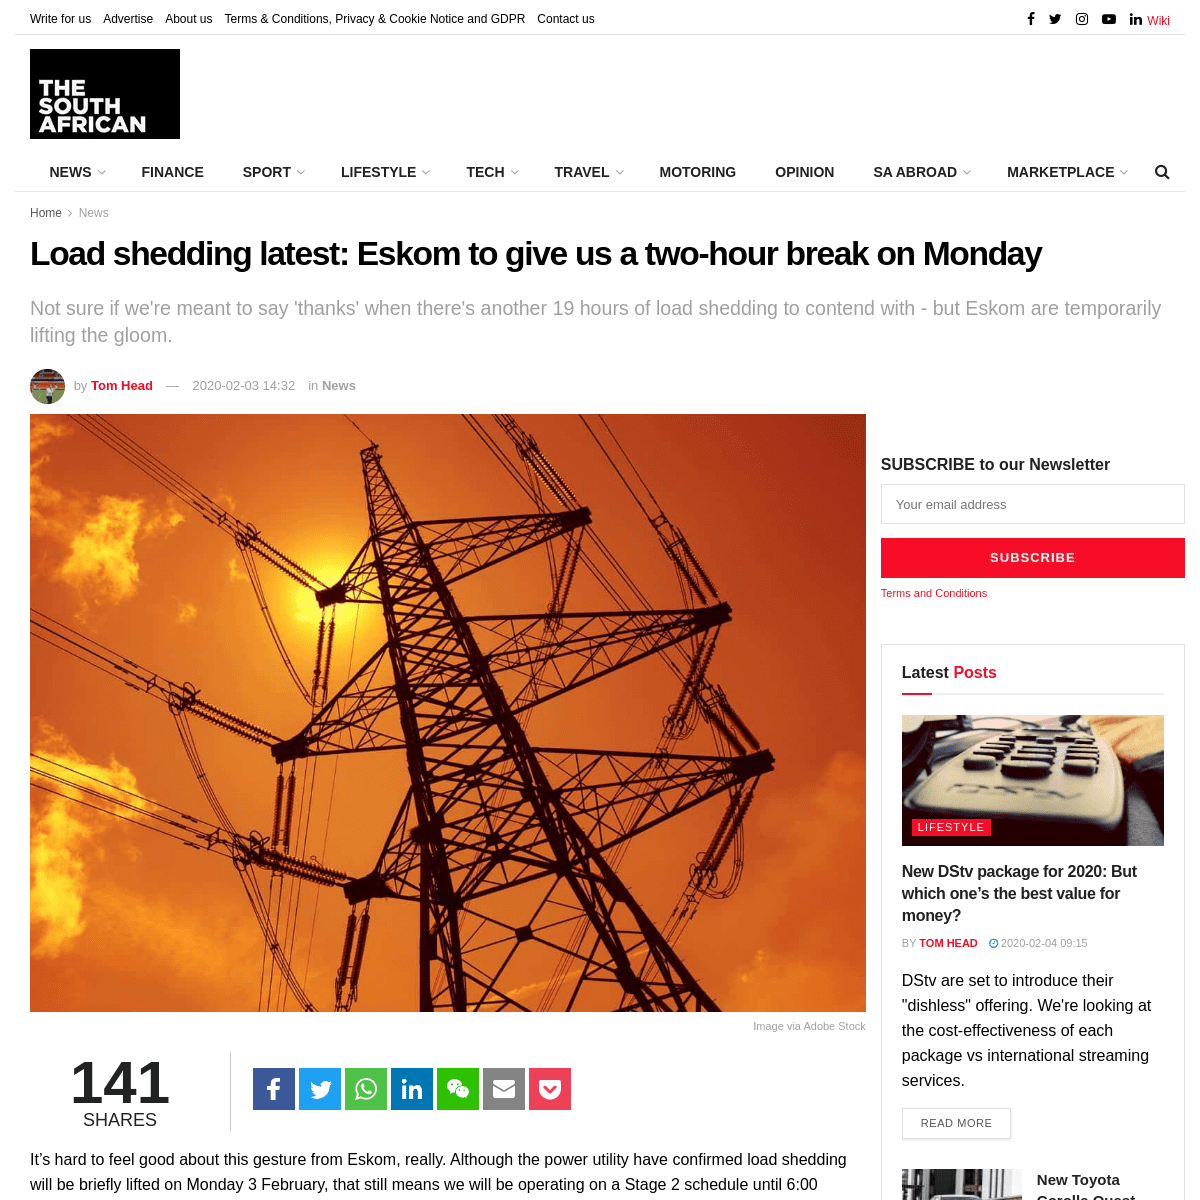 A complete backup of www.thesouthafrican.com/news/load-shedding-schedule-when-monday-power-on-eskom/